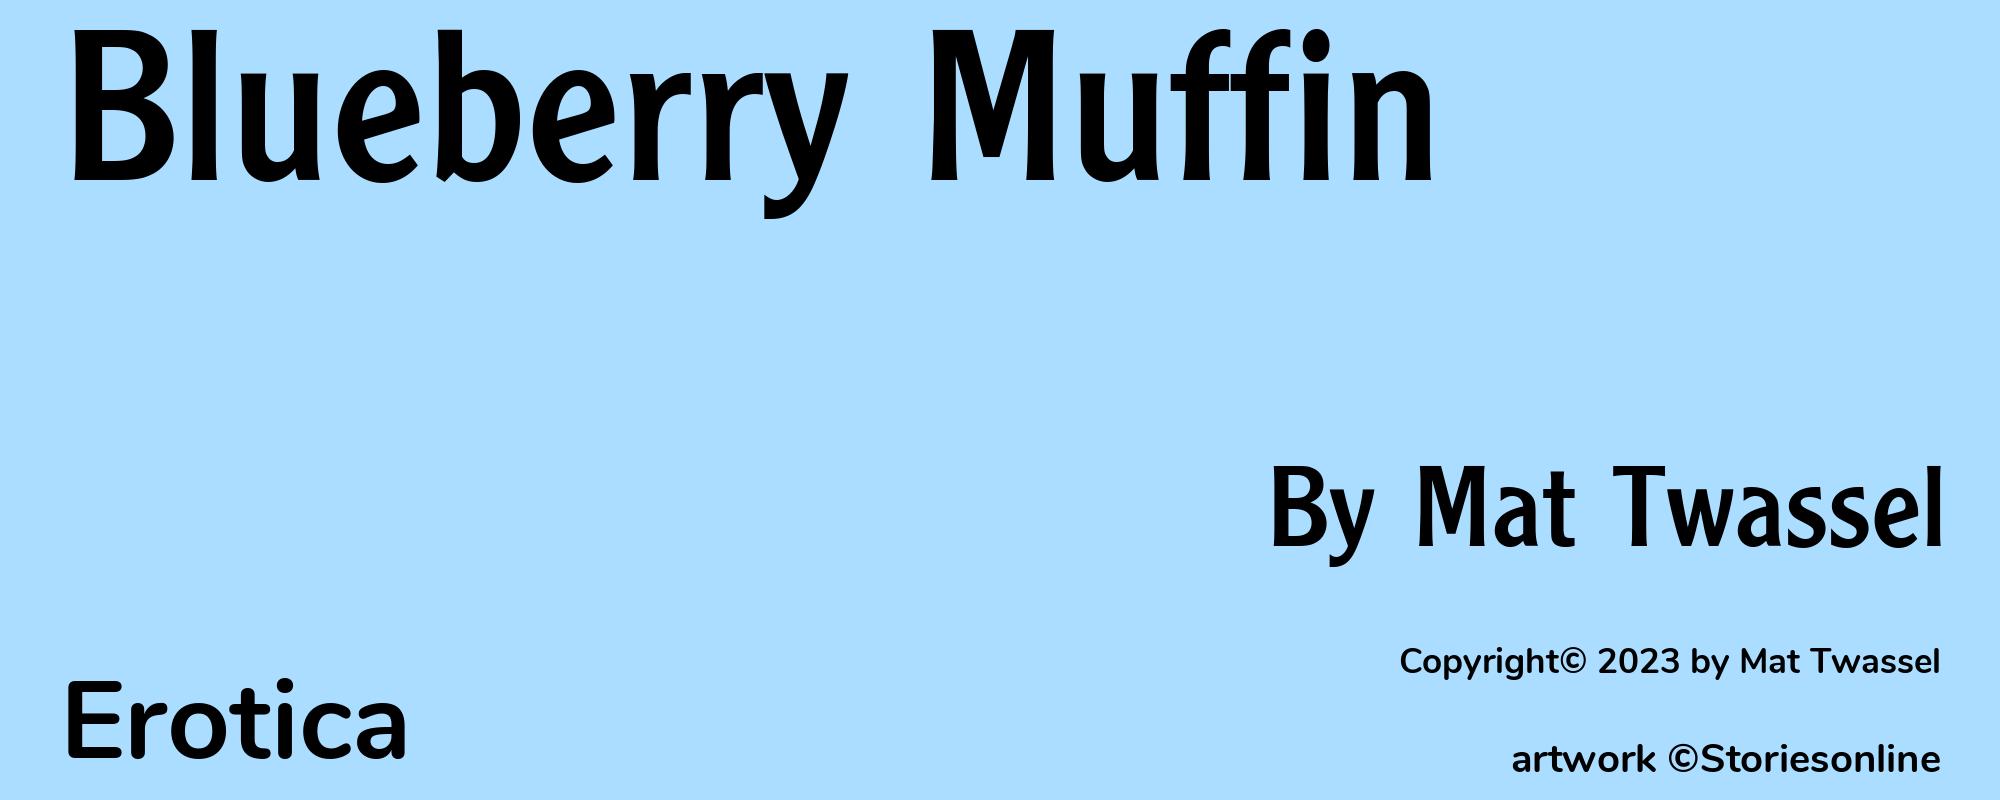 Blueberry Muffin - Cover